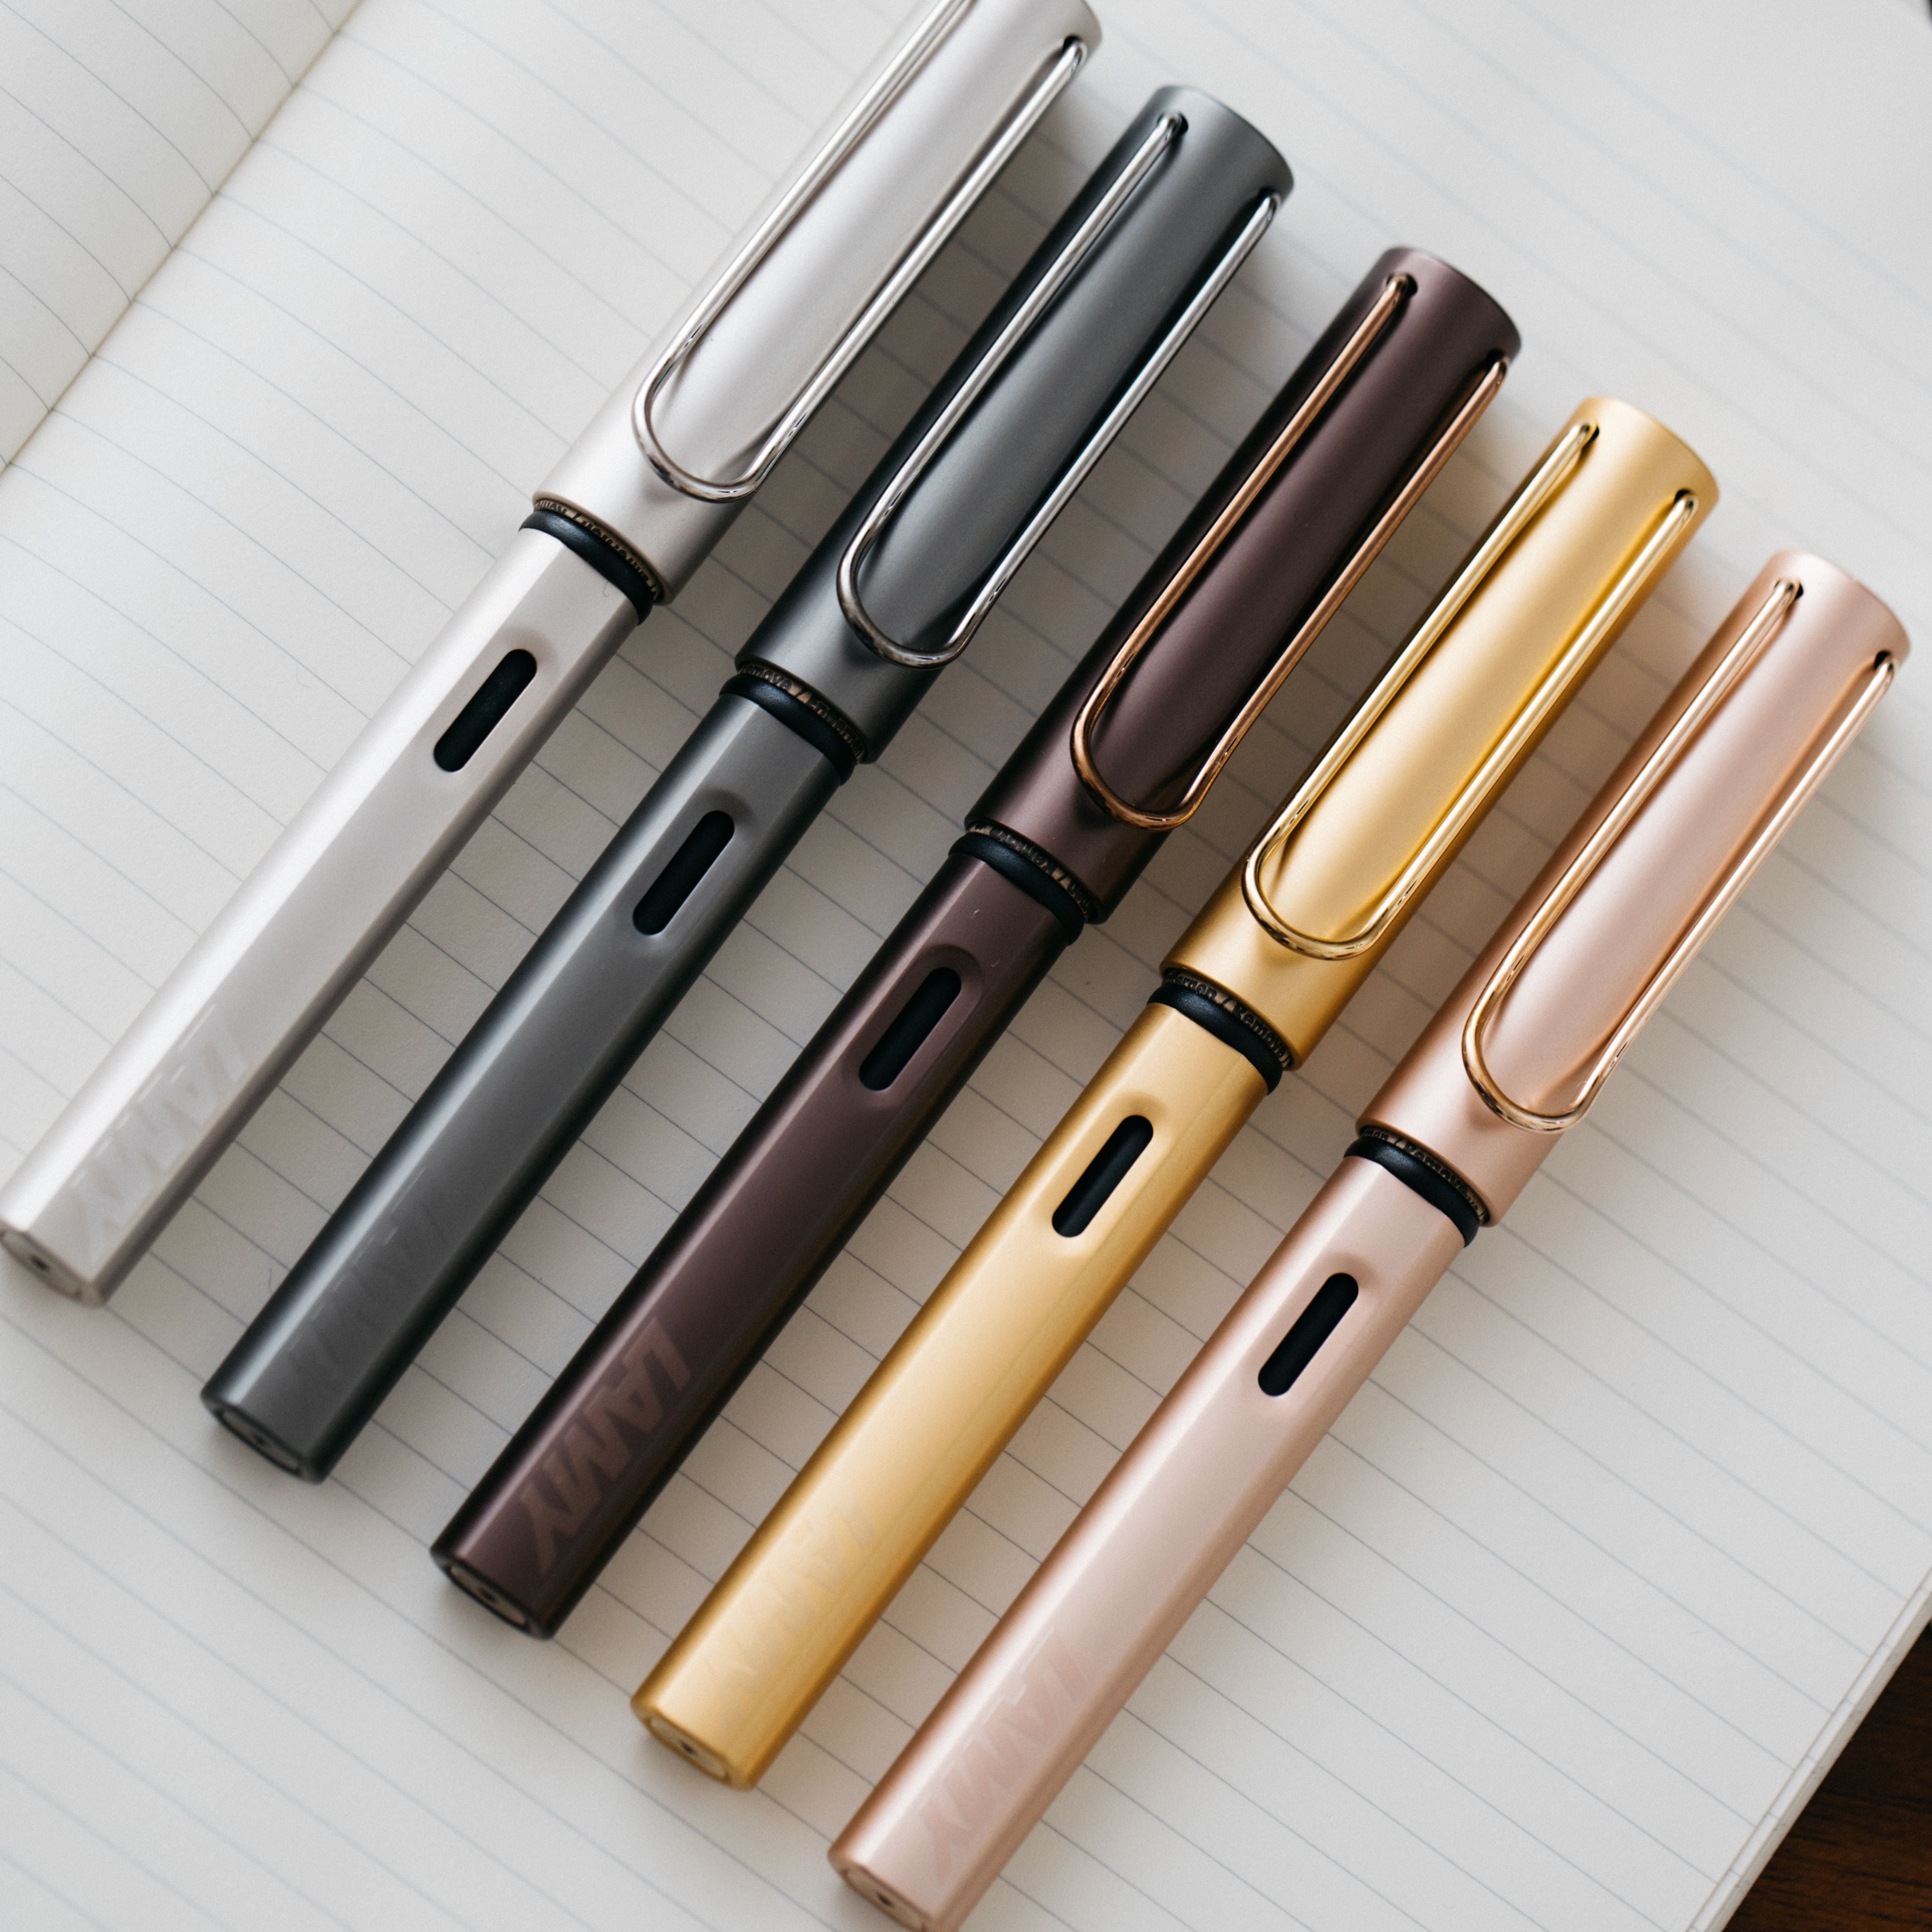 opwinding Spuug uit vod LAMY LX Fountain Pen – Truphae